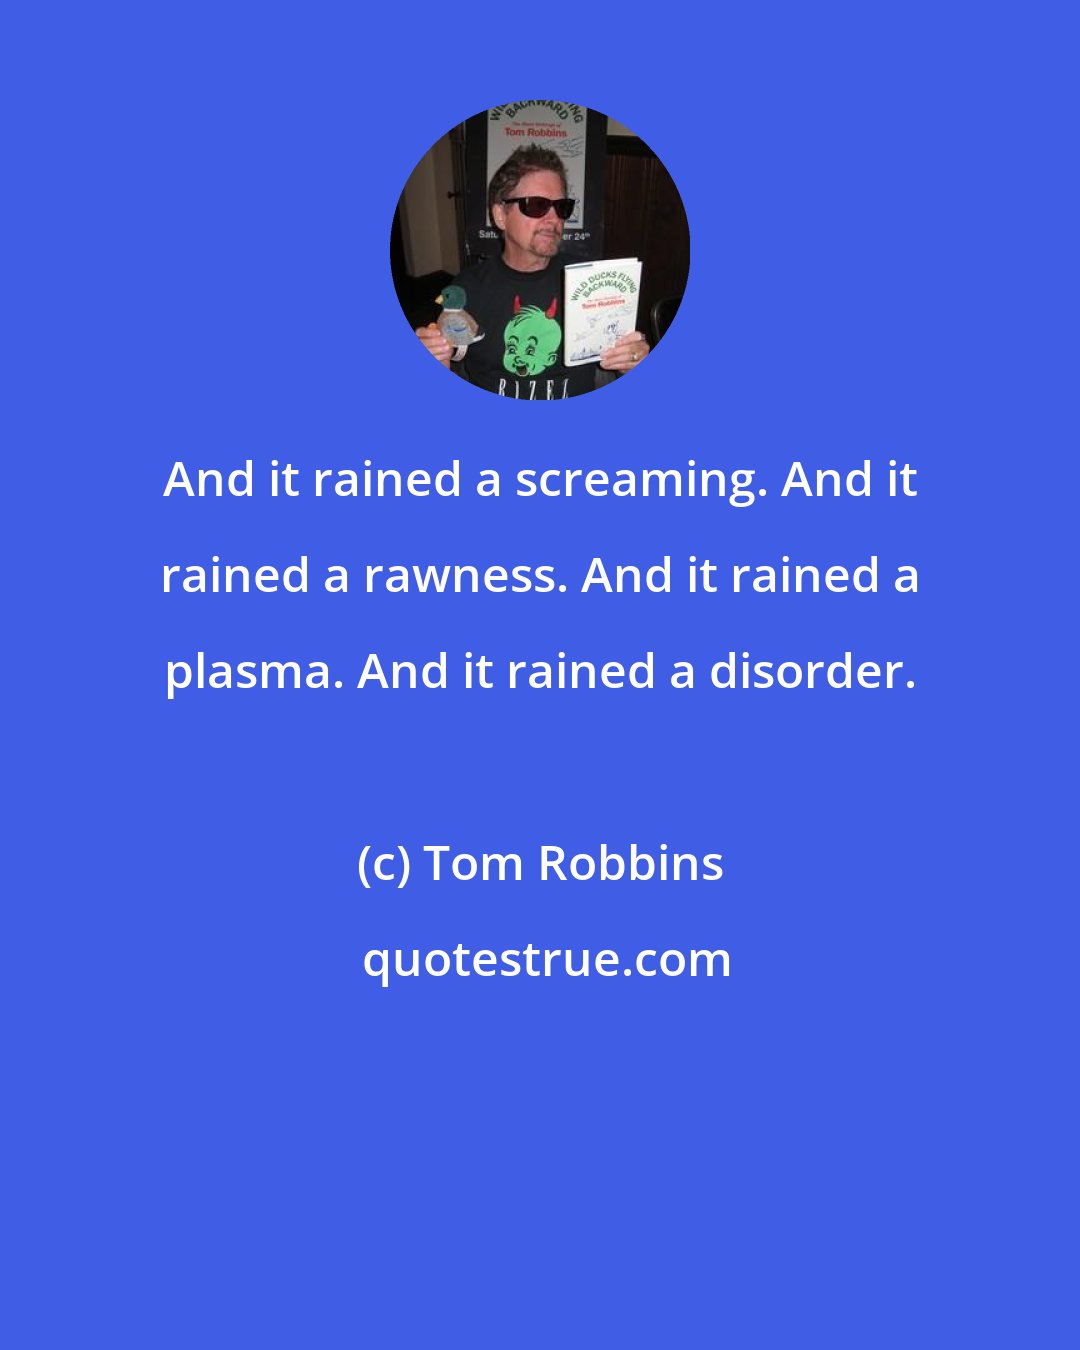 Tom Robbins: And it rained a screaming. And it rained a rawness. And it rained a plasma. And it rained a disorder.